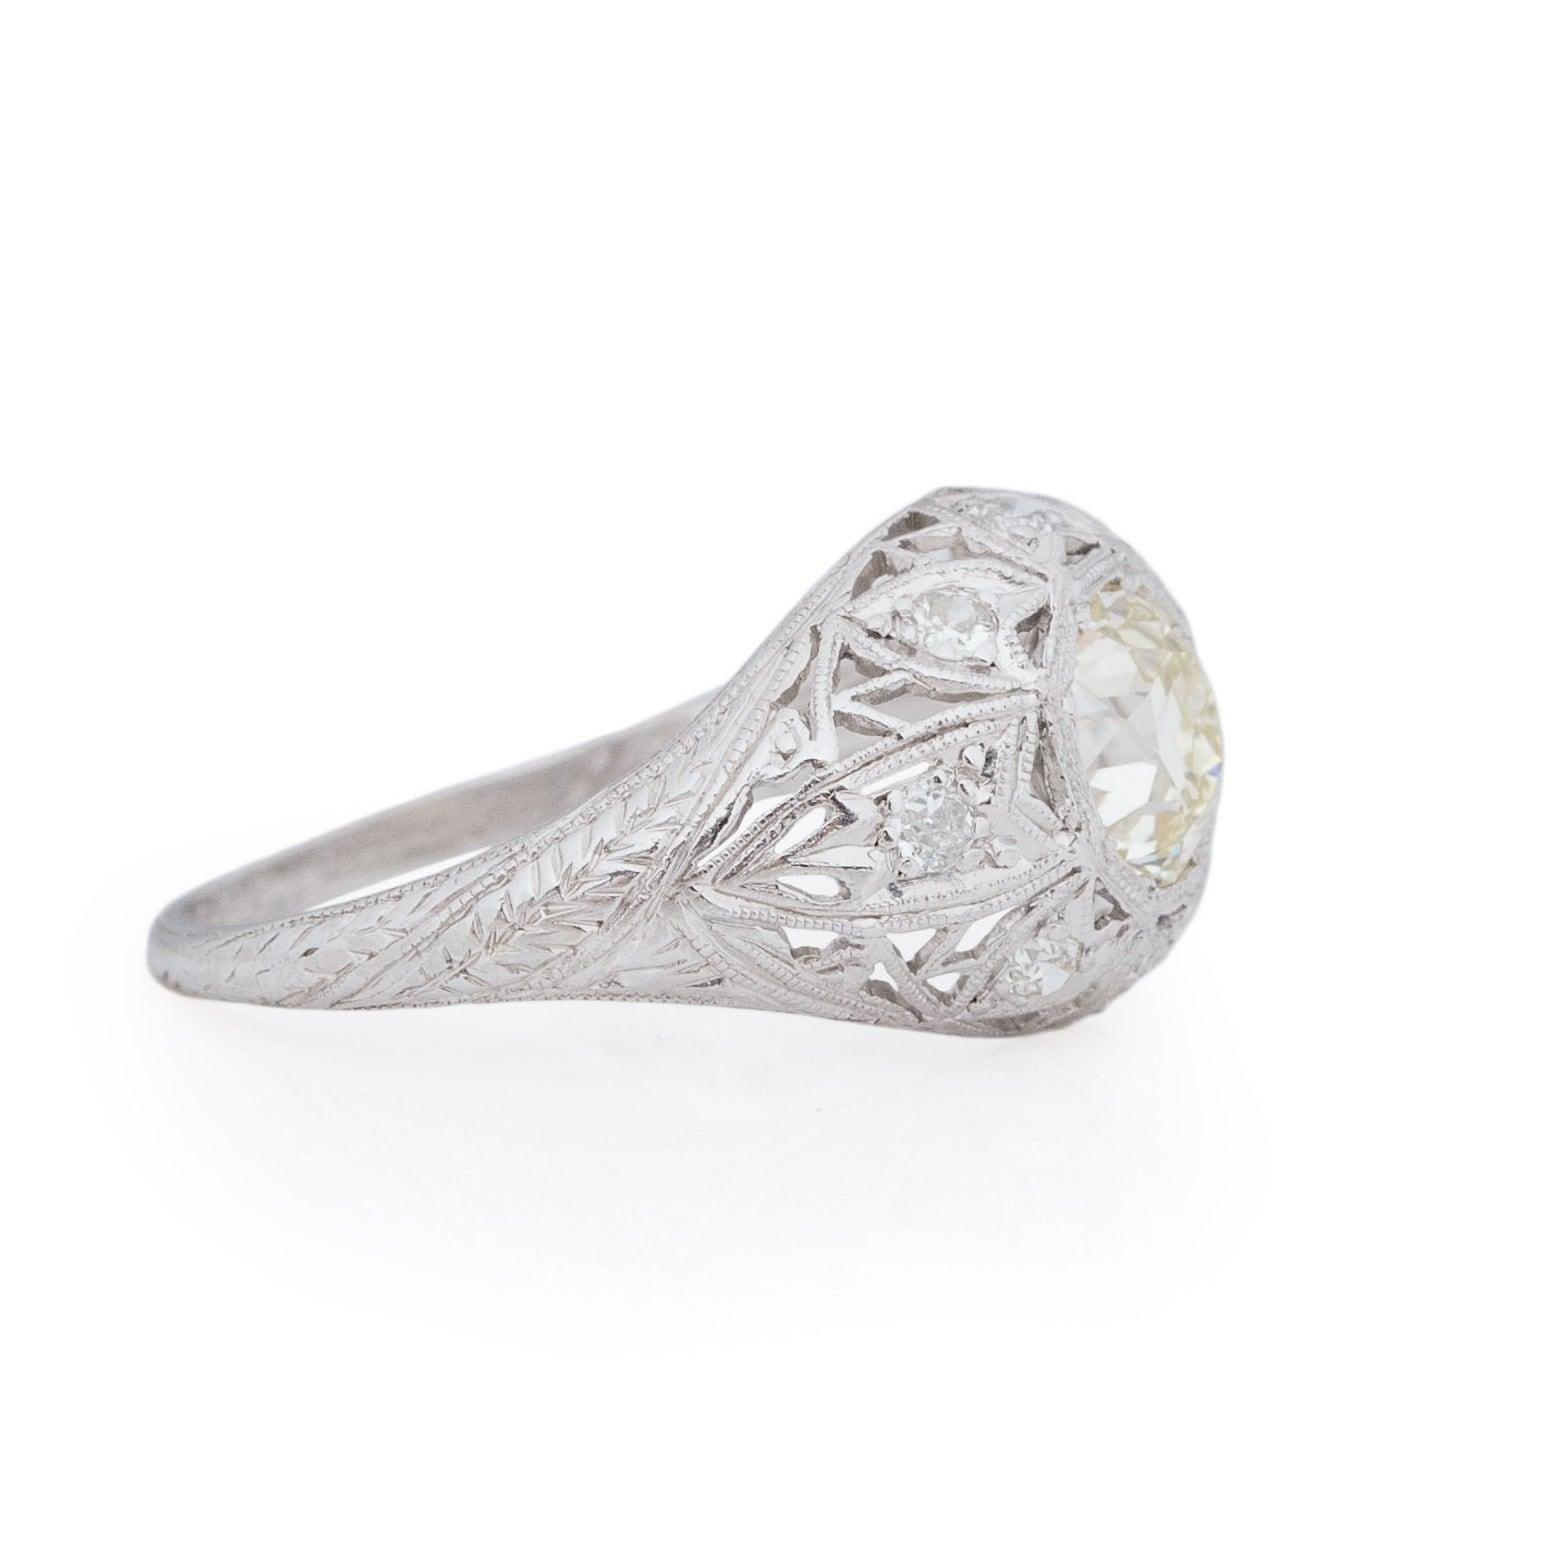 This captivating Art Deco ring showcases impeccable details, including delicate milgrain in the open work and lively diamond accents. Crafted in enduring platinum, this over 100-year-old piece features a timeless leaf design along the shank and a